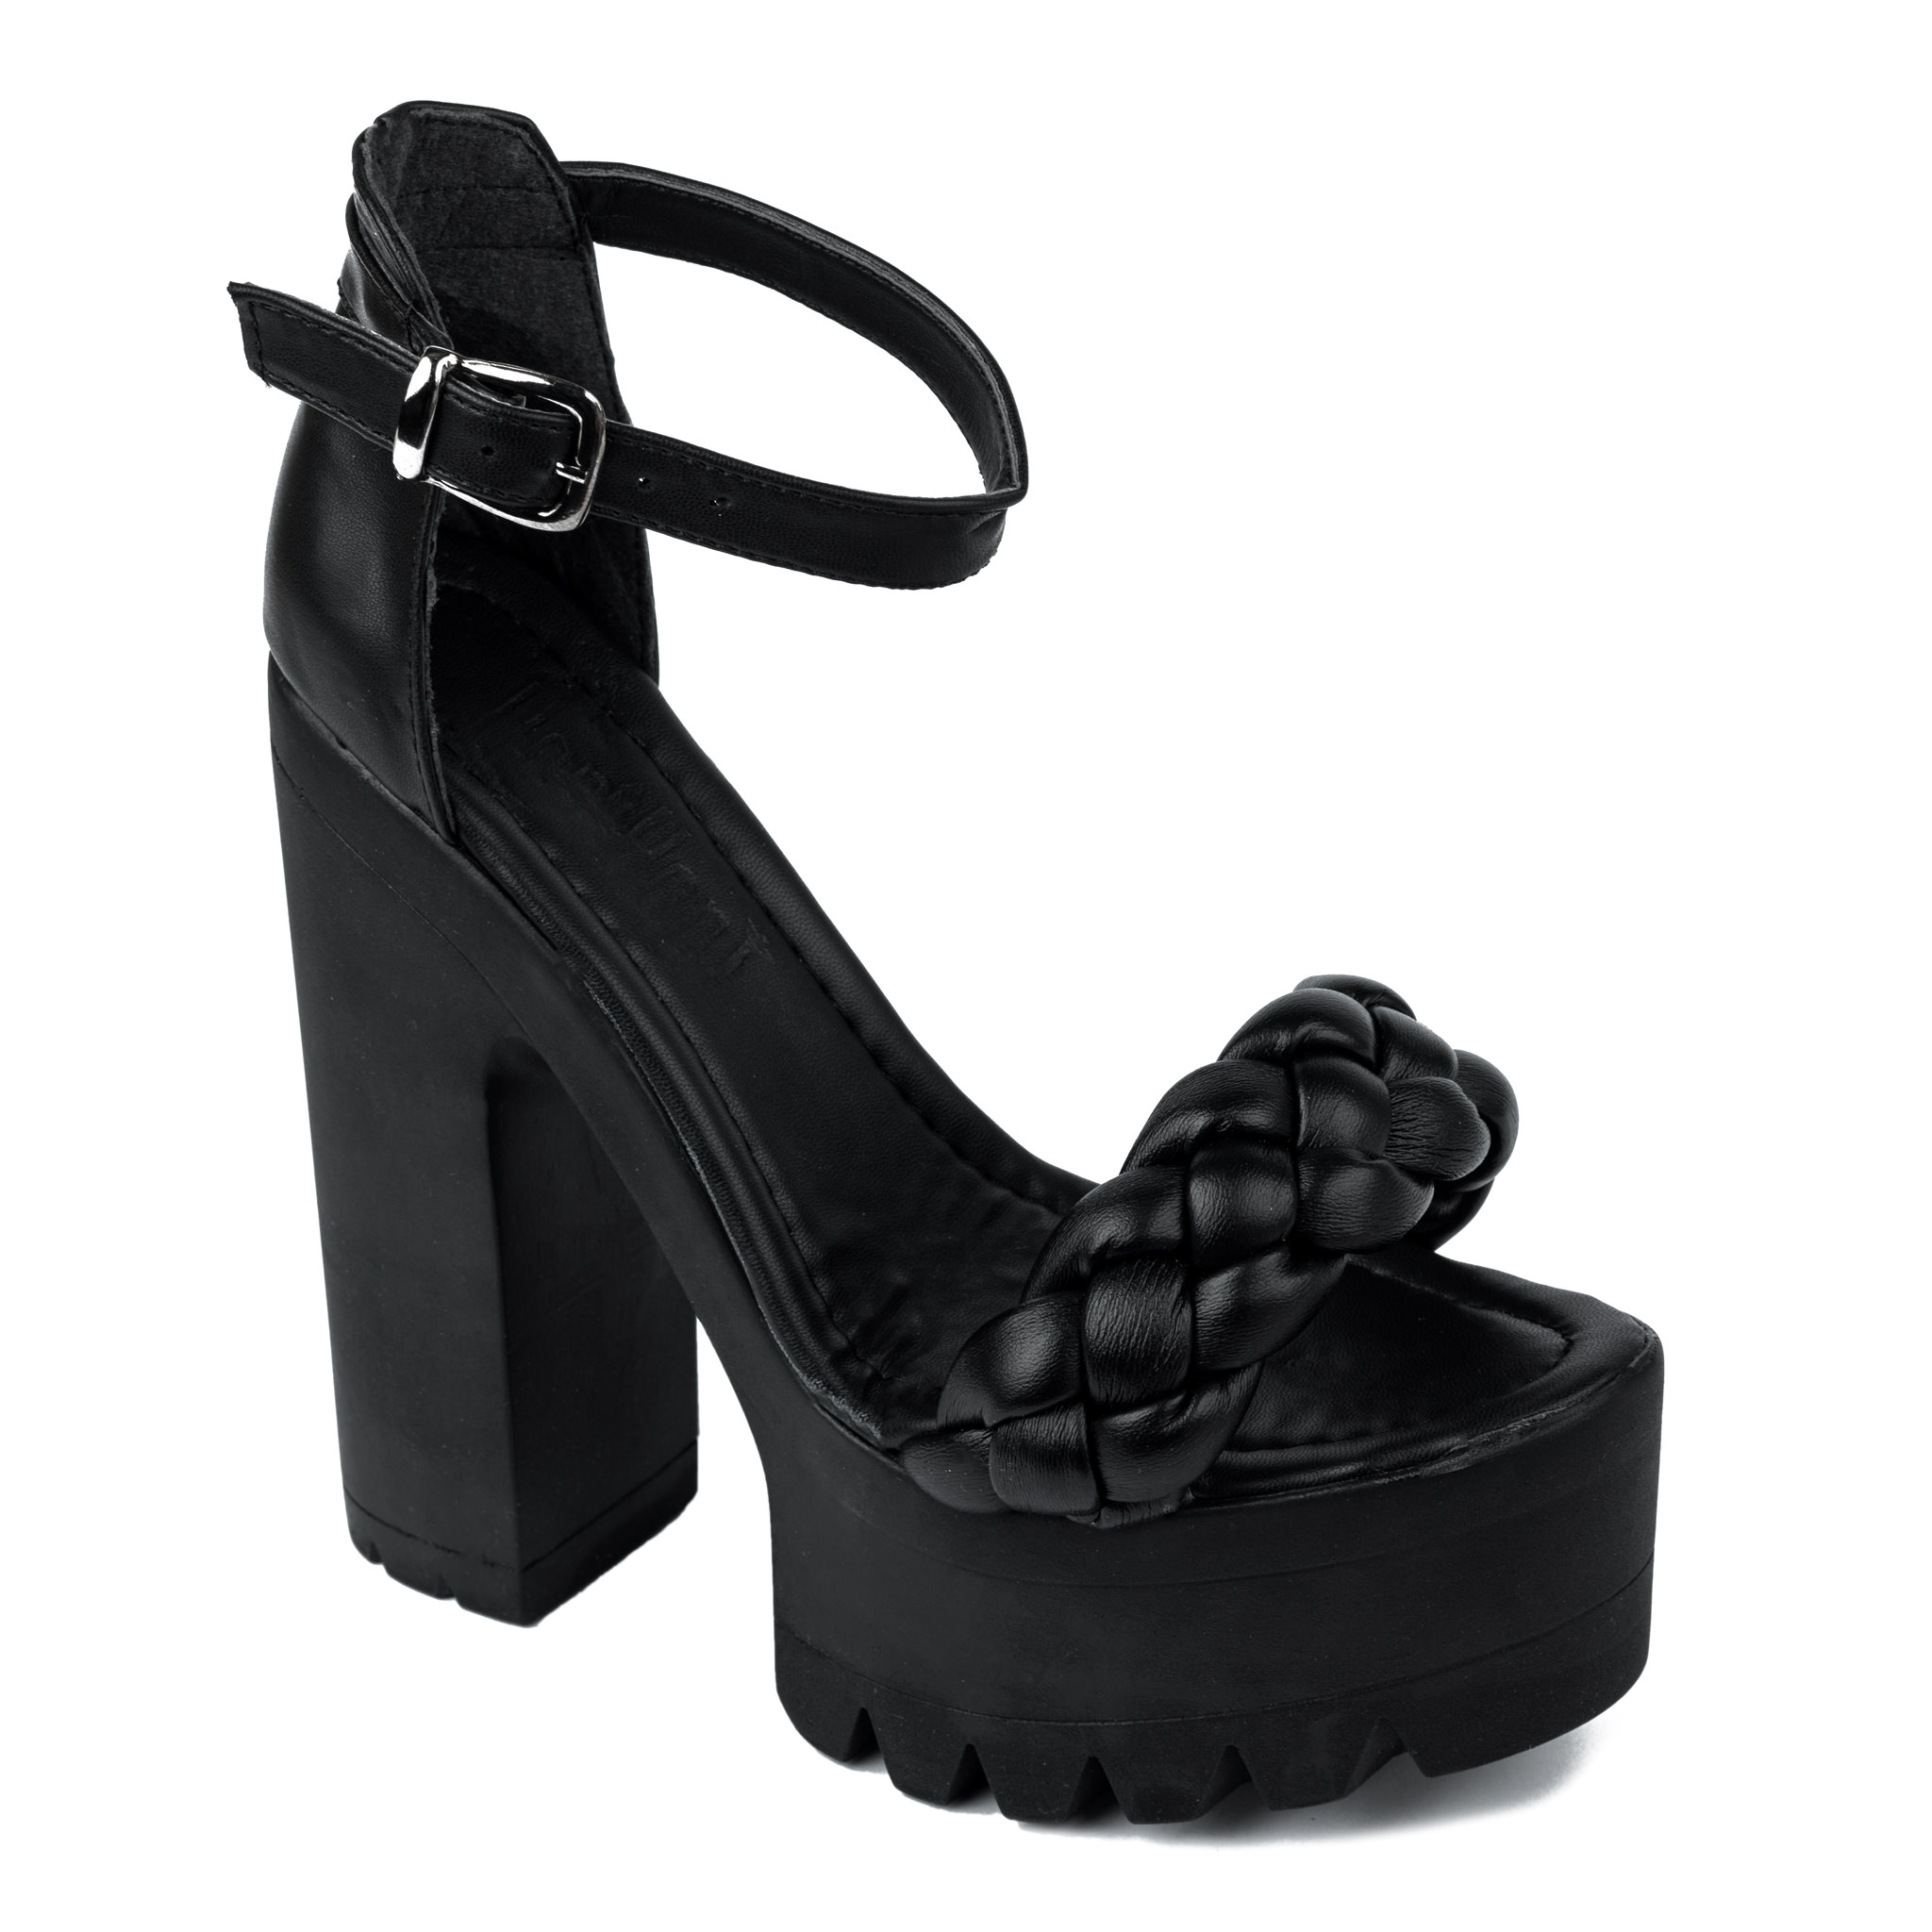 KNITTED PLATFORM SANDALS WITH THICK HEEL - BLACK